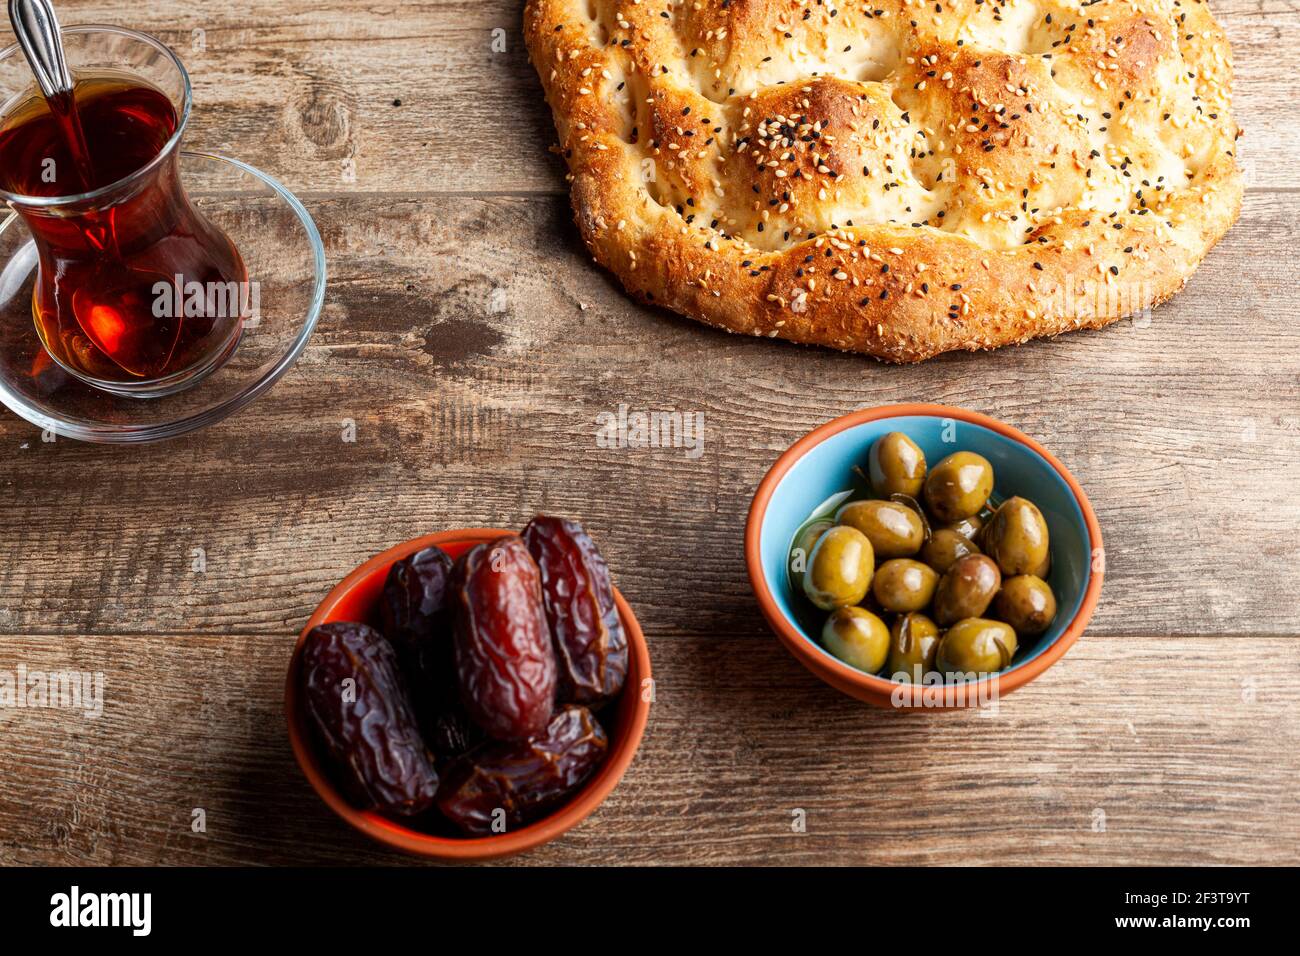 Angled view of the traditional meal for iftar and sahur in the holly month of Ramadan. Turkish tea in special glasses, ramazan pidesi,  a type of flat Stock Photo